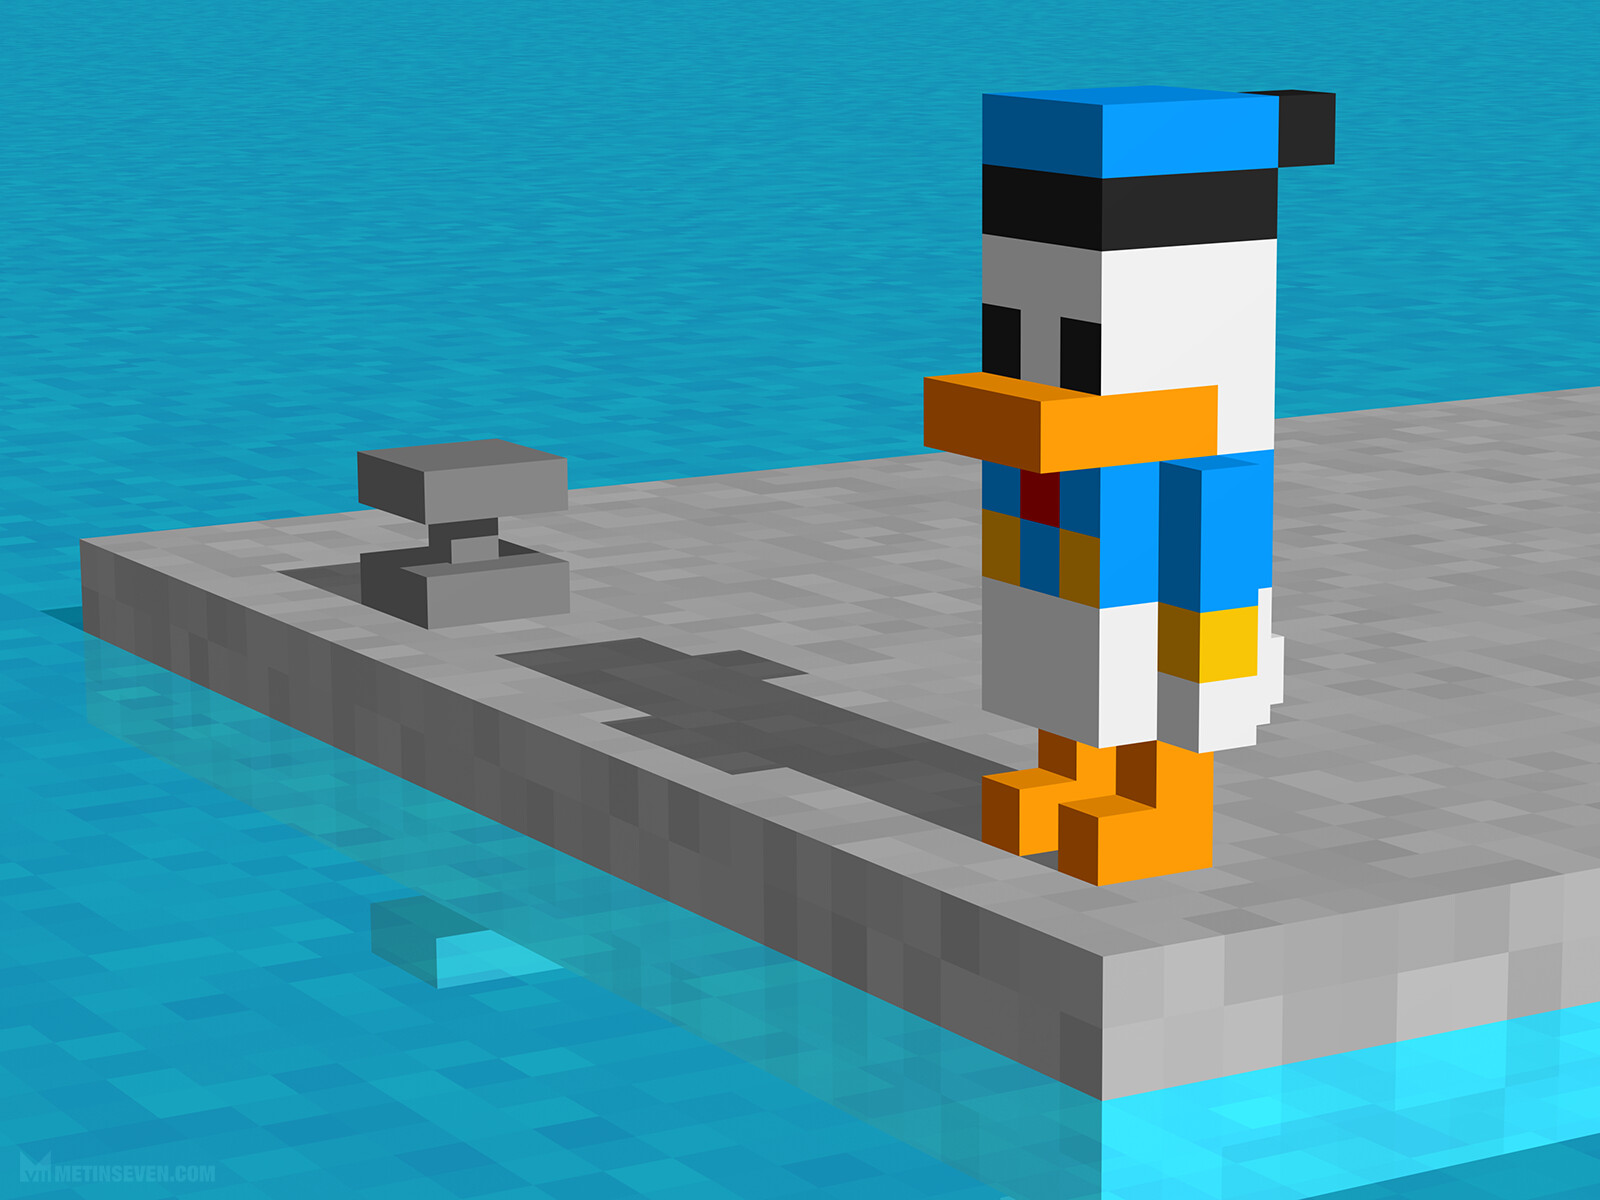 Semi-abstract 3D pixel impression of Donald Duck